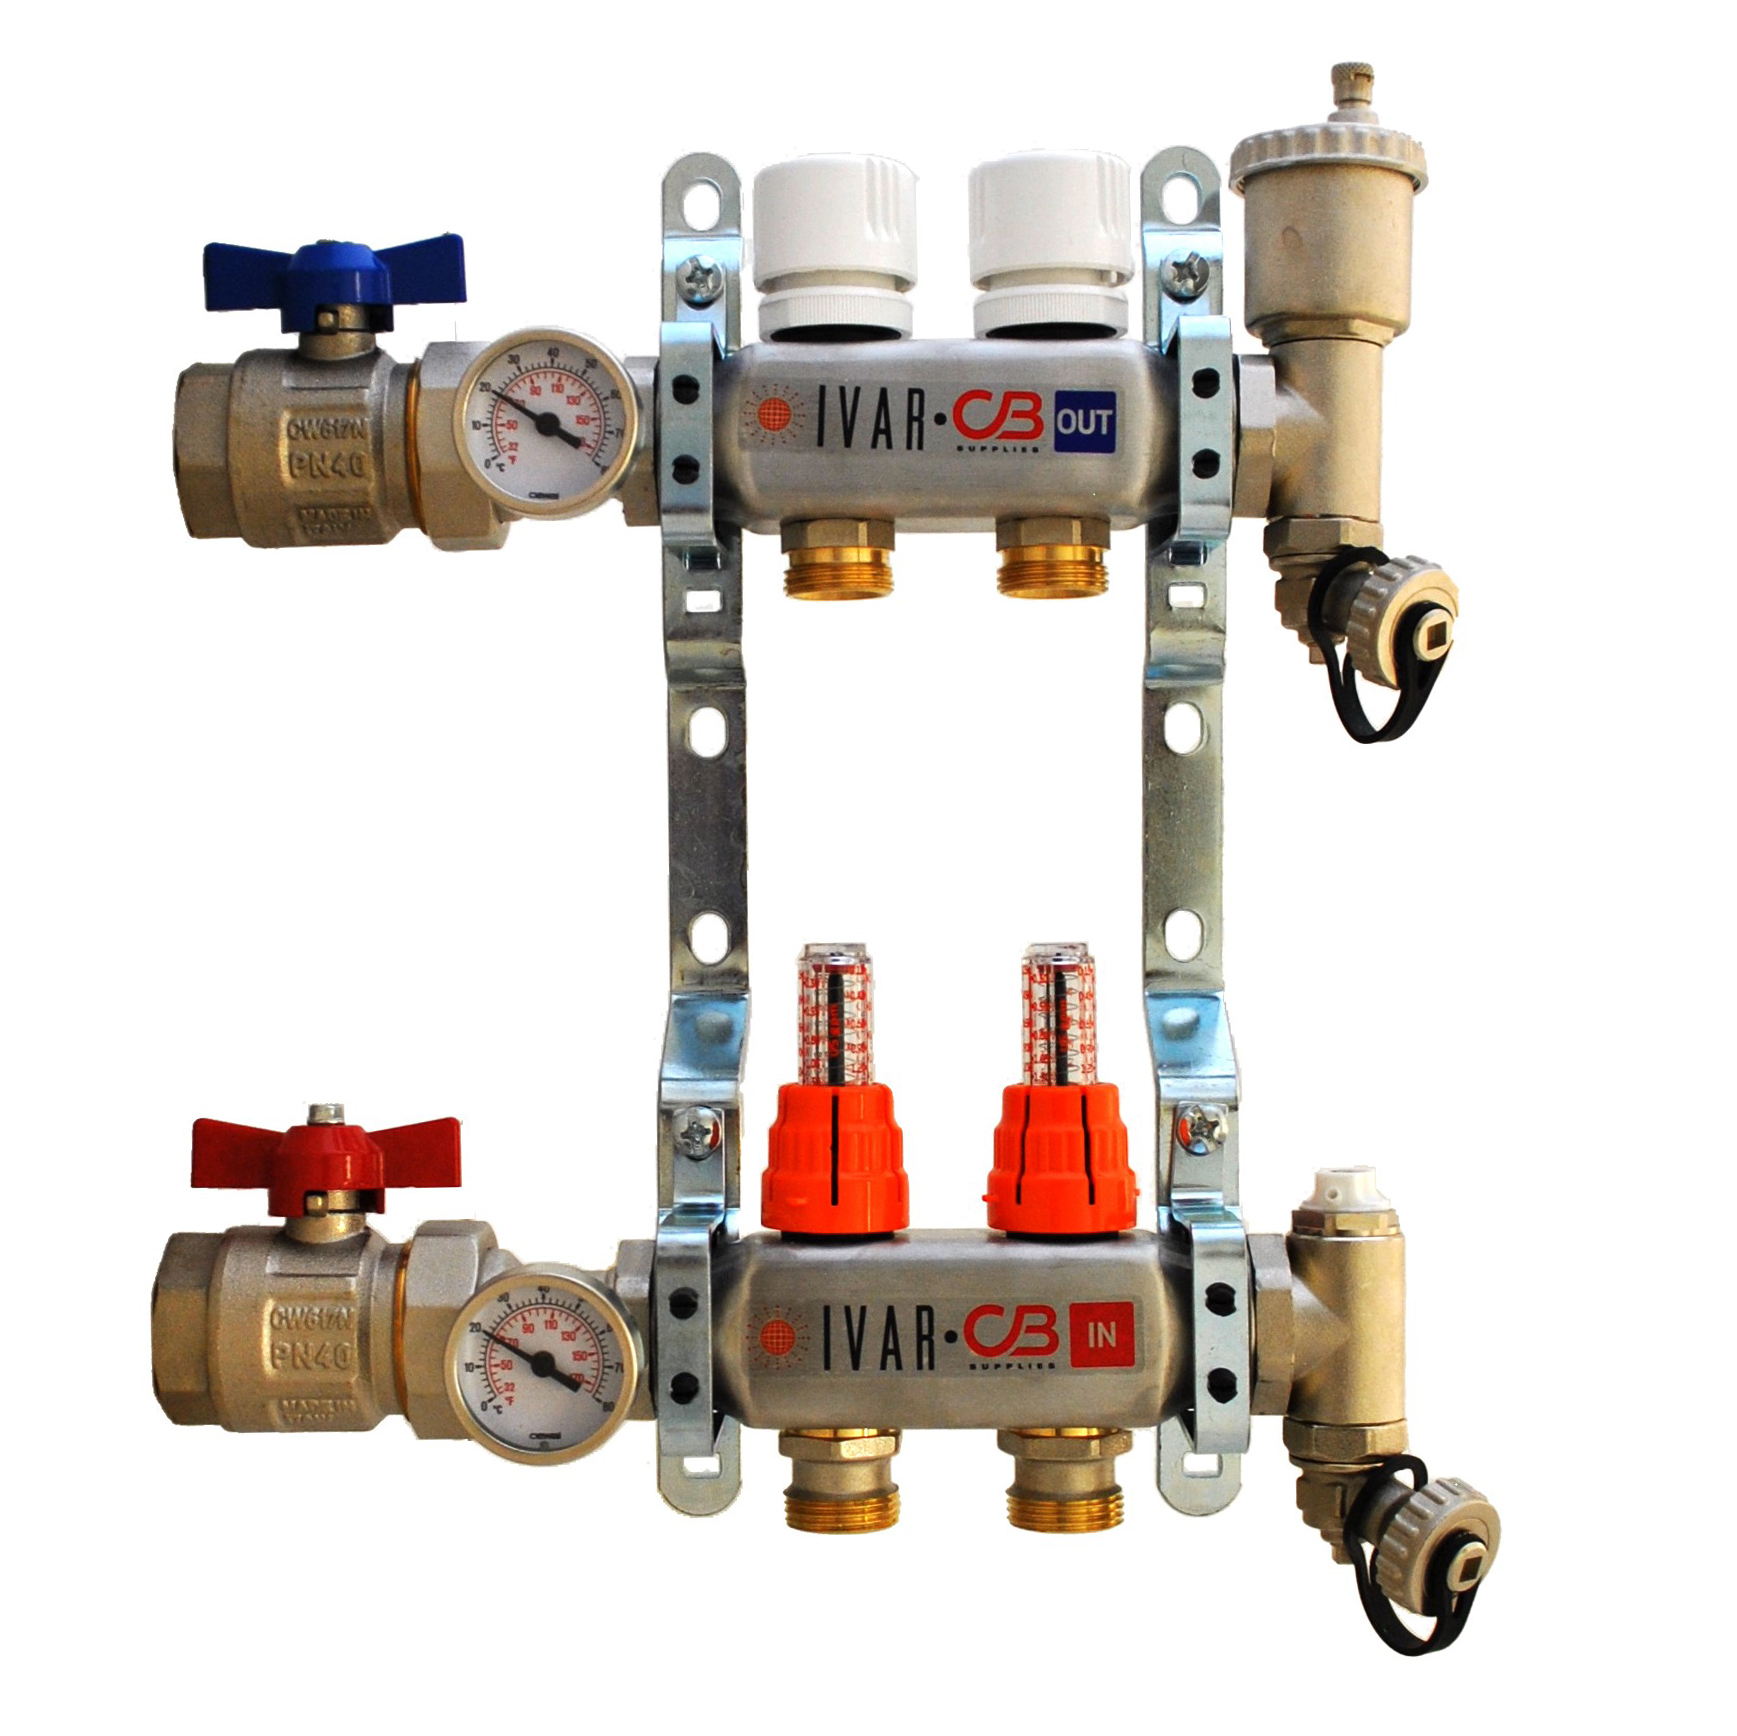 1" IVAR Stainless Steel Hydronic Manifold for Radiant Floor Heating - 2 ports